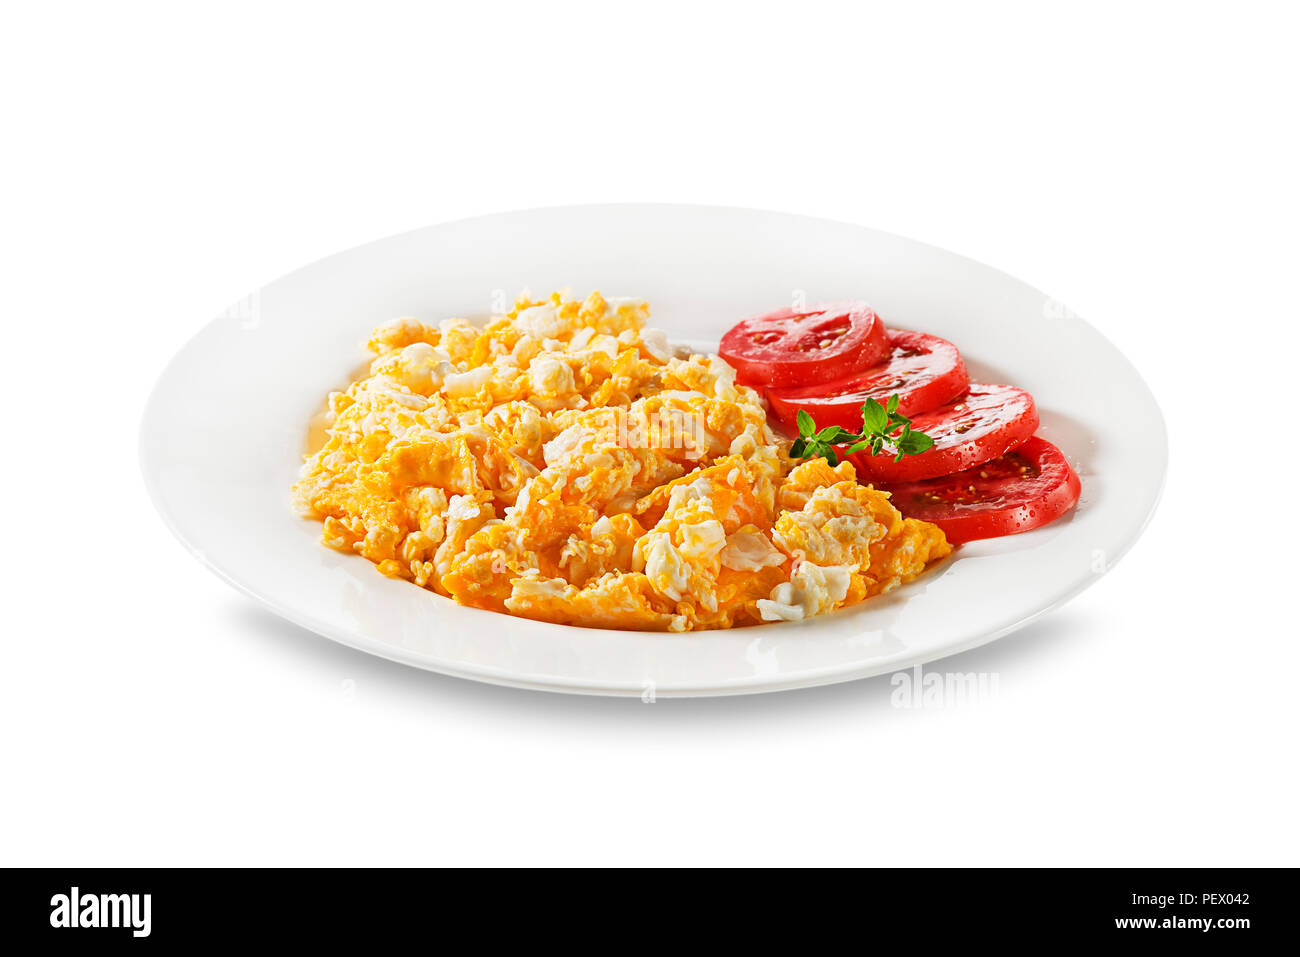 Delish breakfast with Scrambled eggs herbs and tomatoes Stock Photo